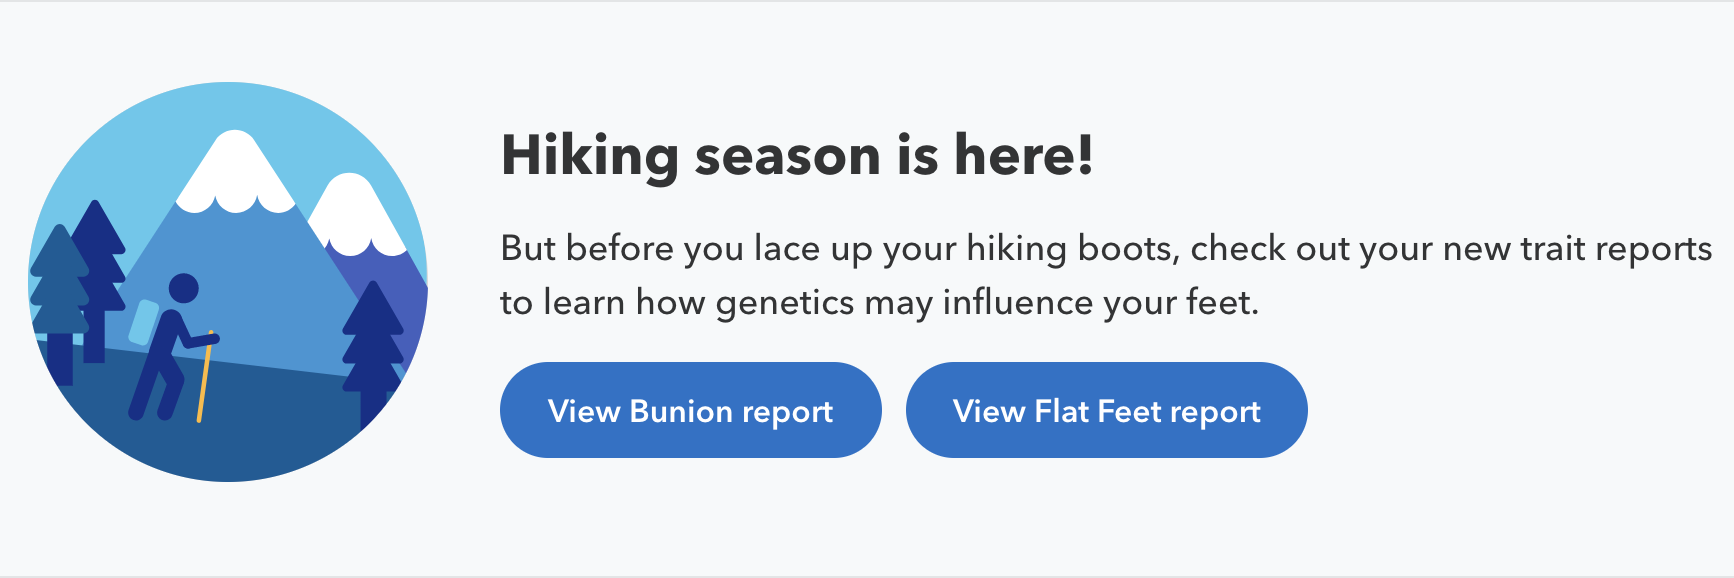 Bunion and Flat Feet Report, 23andme